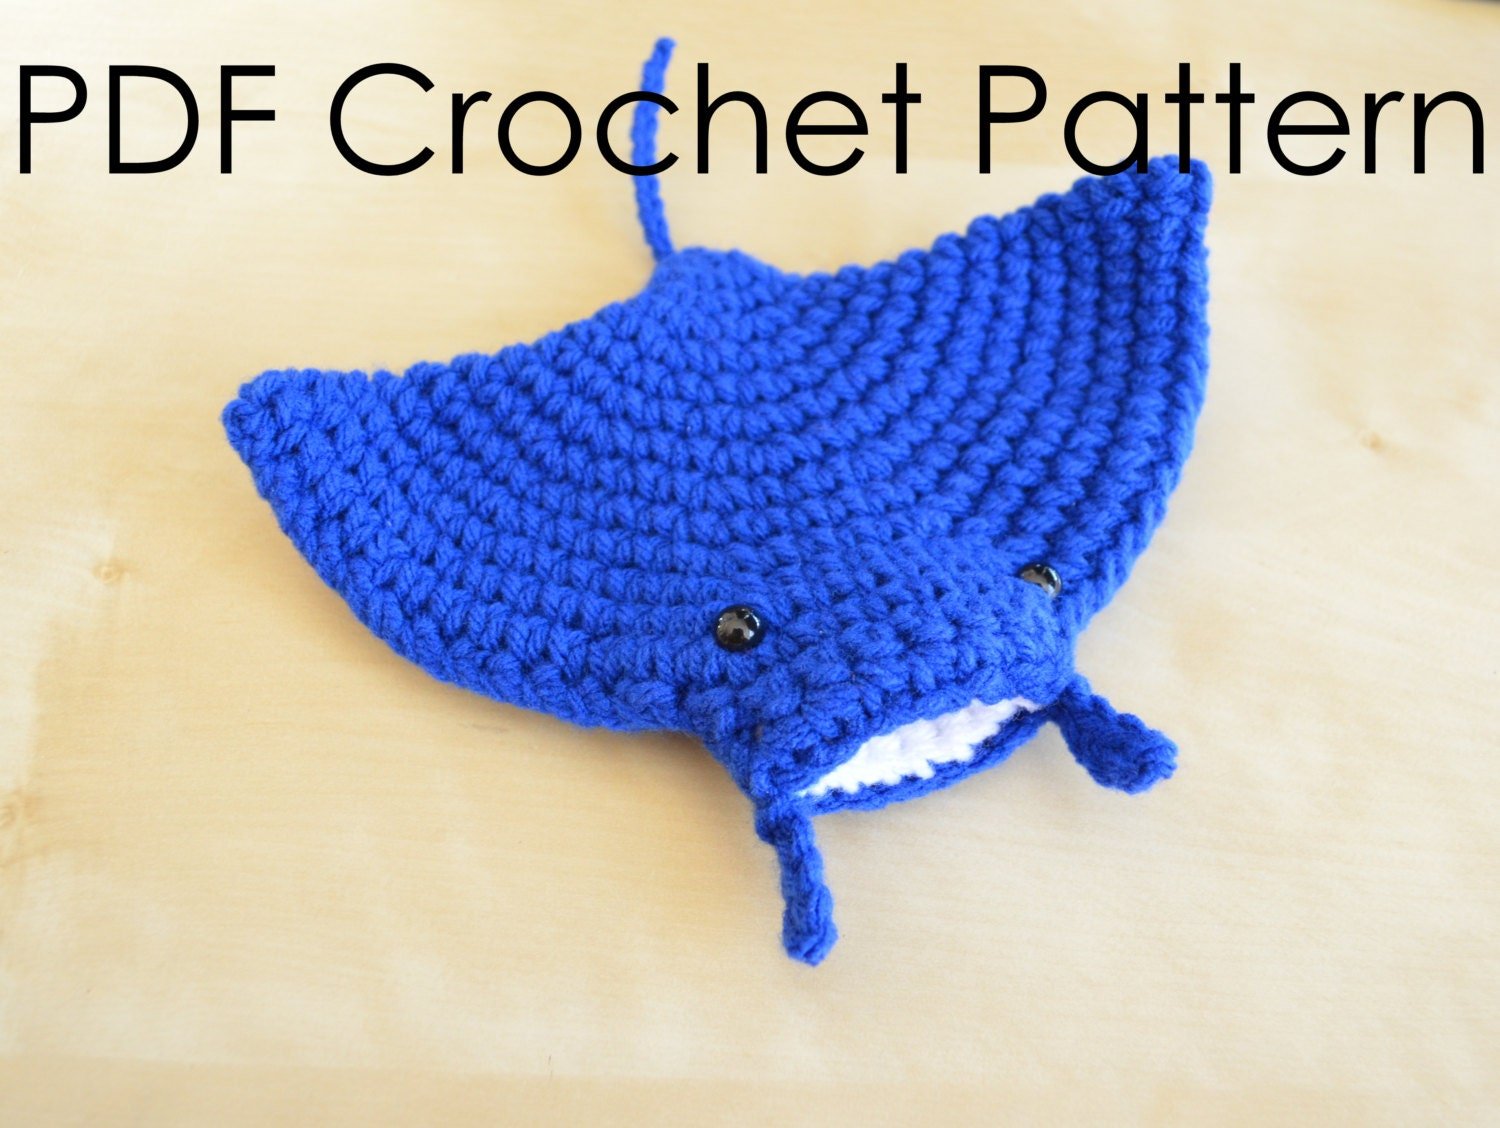 Has anyone ever seen this? : r/crochet